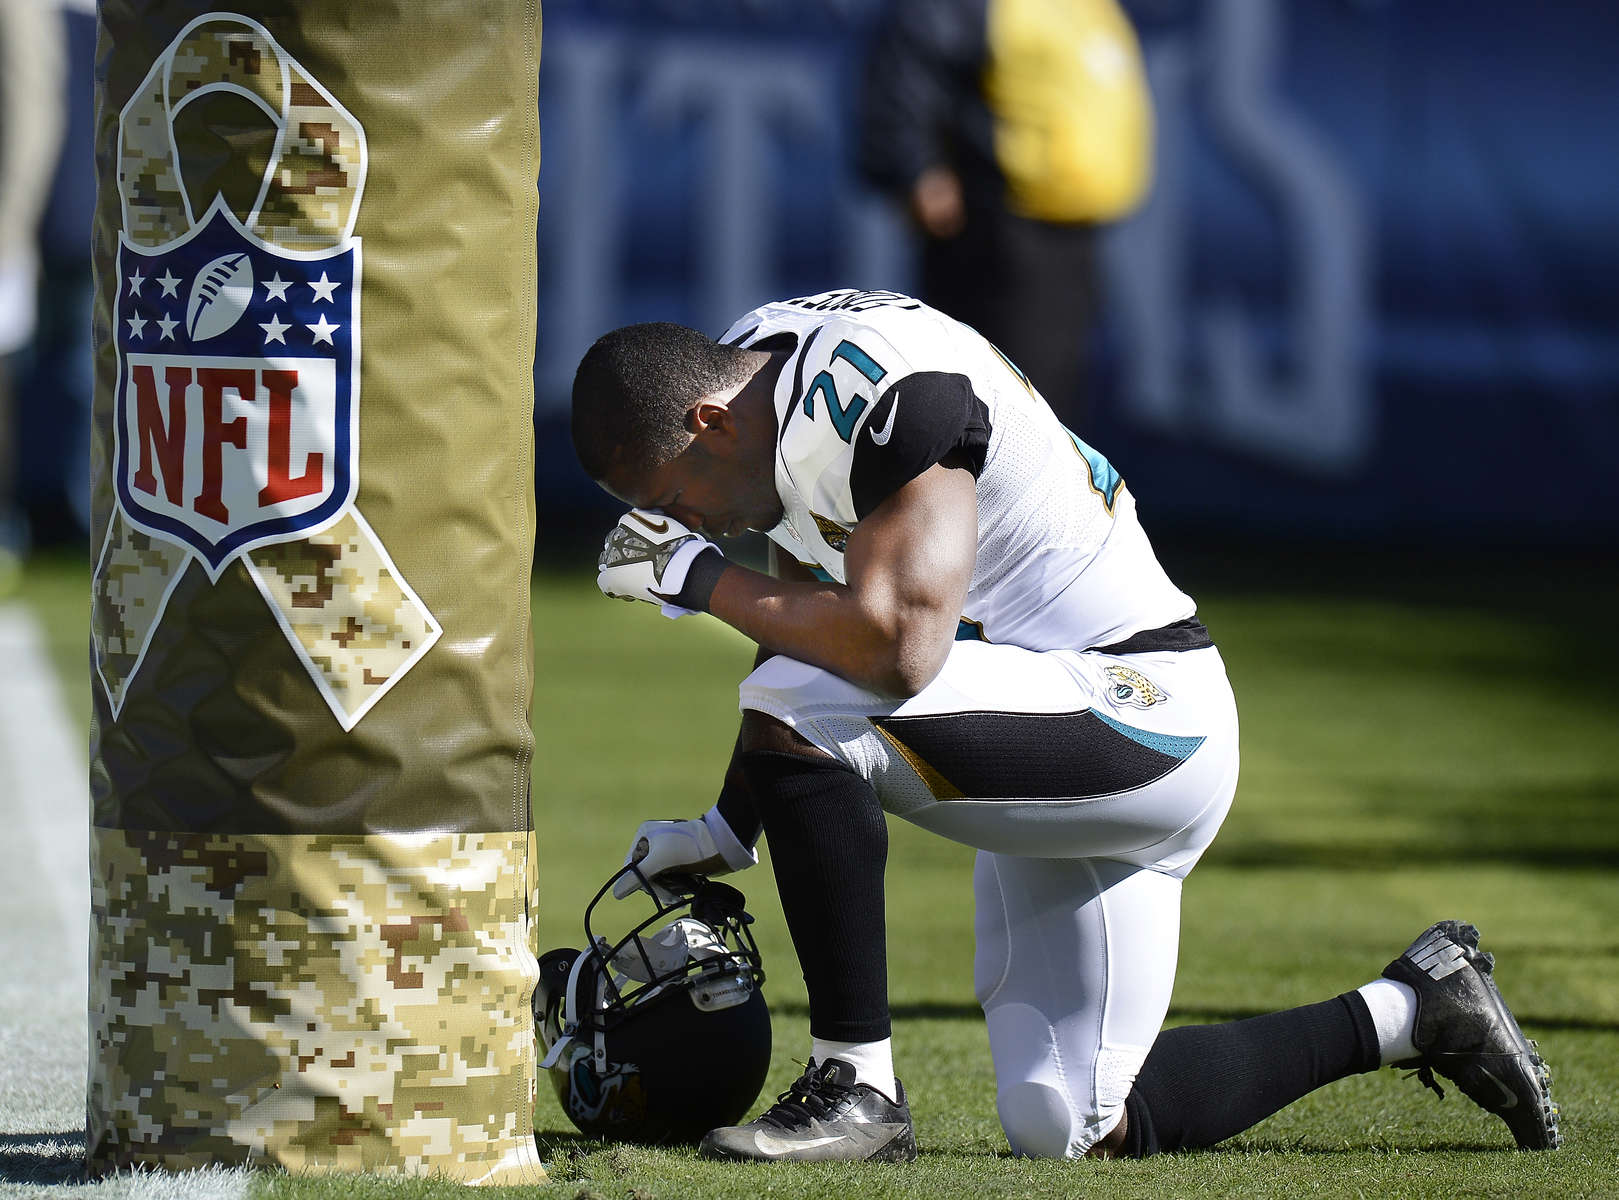 Jacksonville Jaguars running back Justin Forsett kneels by a Salute to Service logo on a goal post before an NFL football game between the Jaguars and the Tennessee Titans on Nov. 10, 2013, in Nashville, Tenn. (AP Photo/ Mark Zaleski)